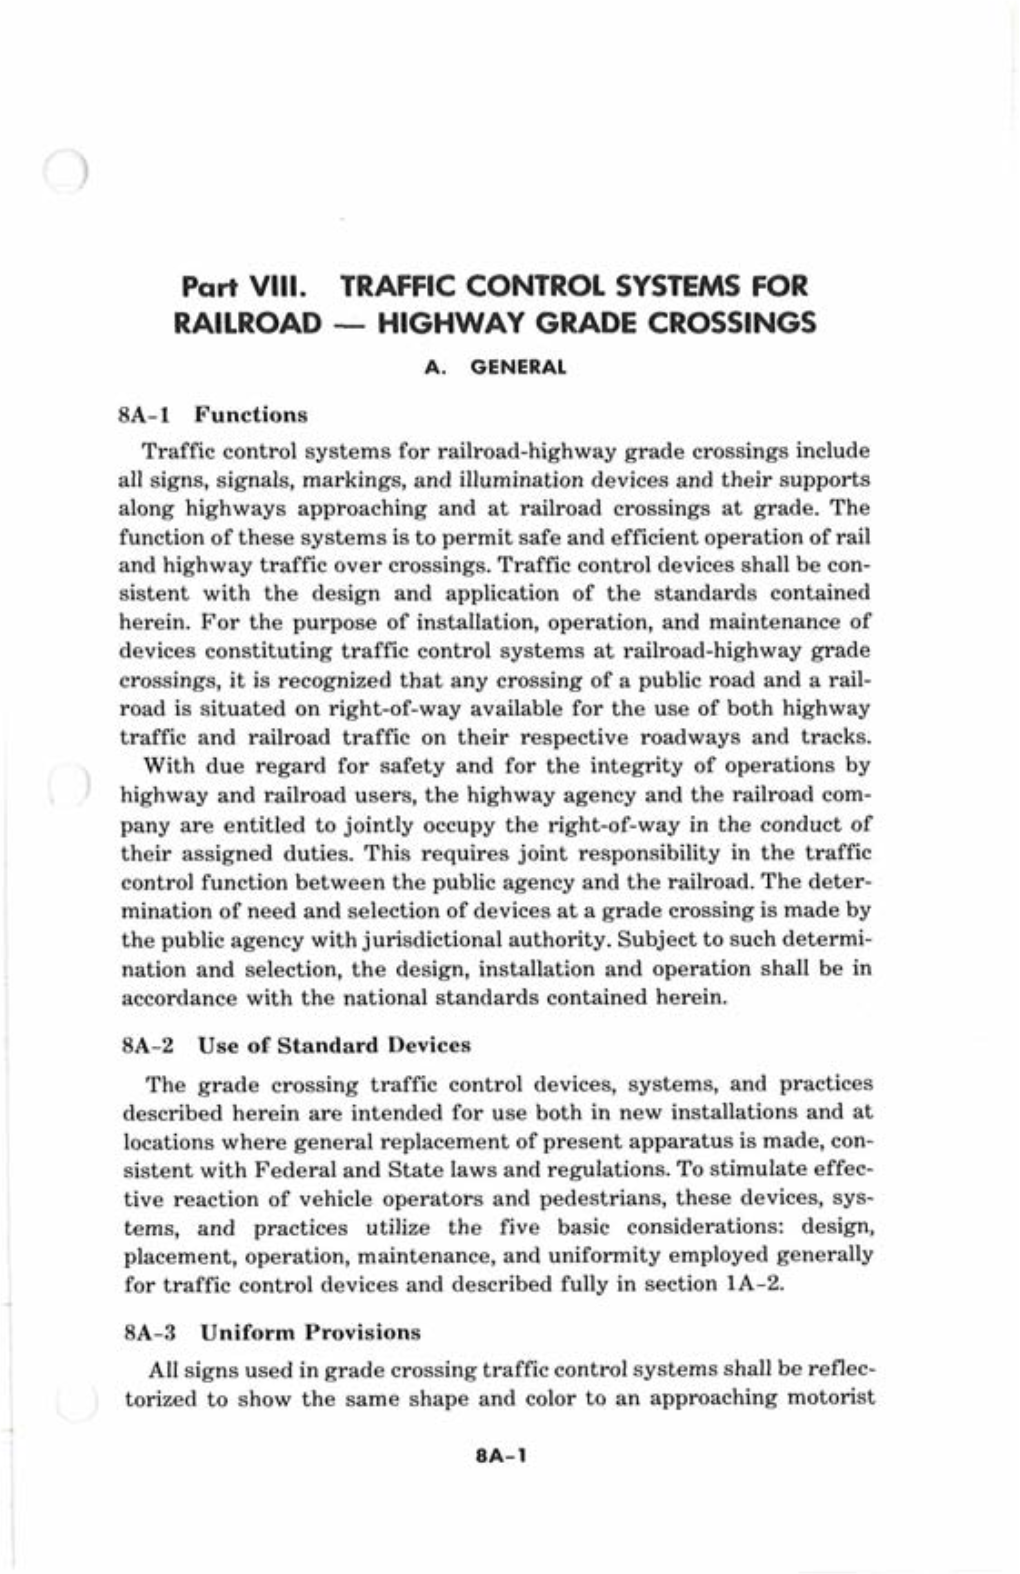 Part VIII. TRAFFIC CONTROL SYSTEMS for RAILROAD - HIGHWAY GRADE CROSSINGS A